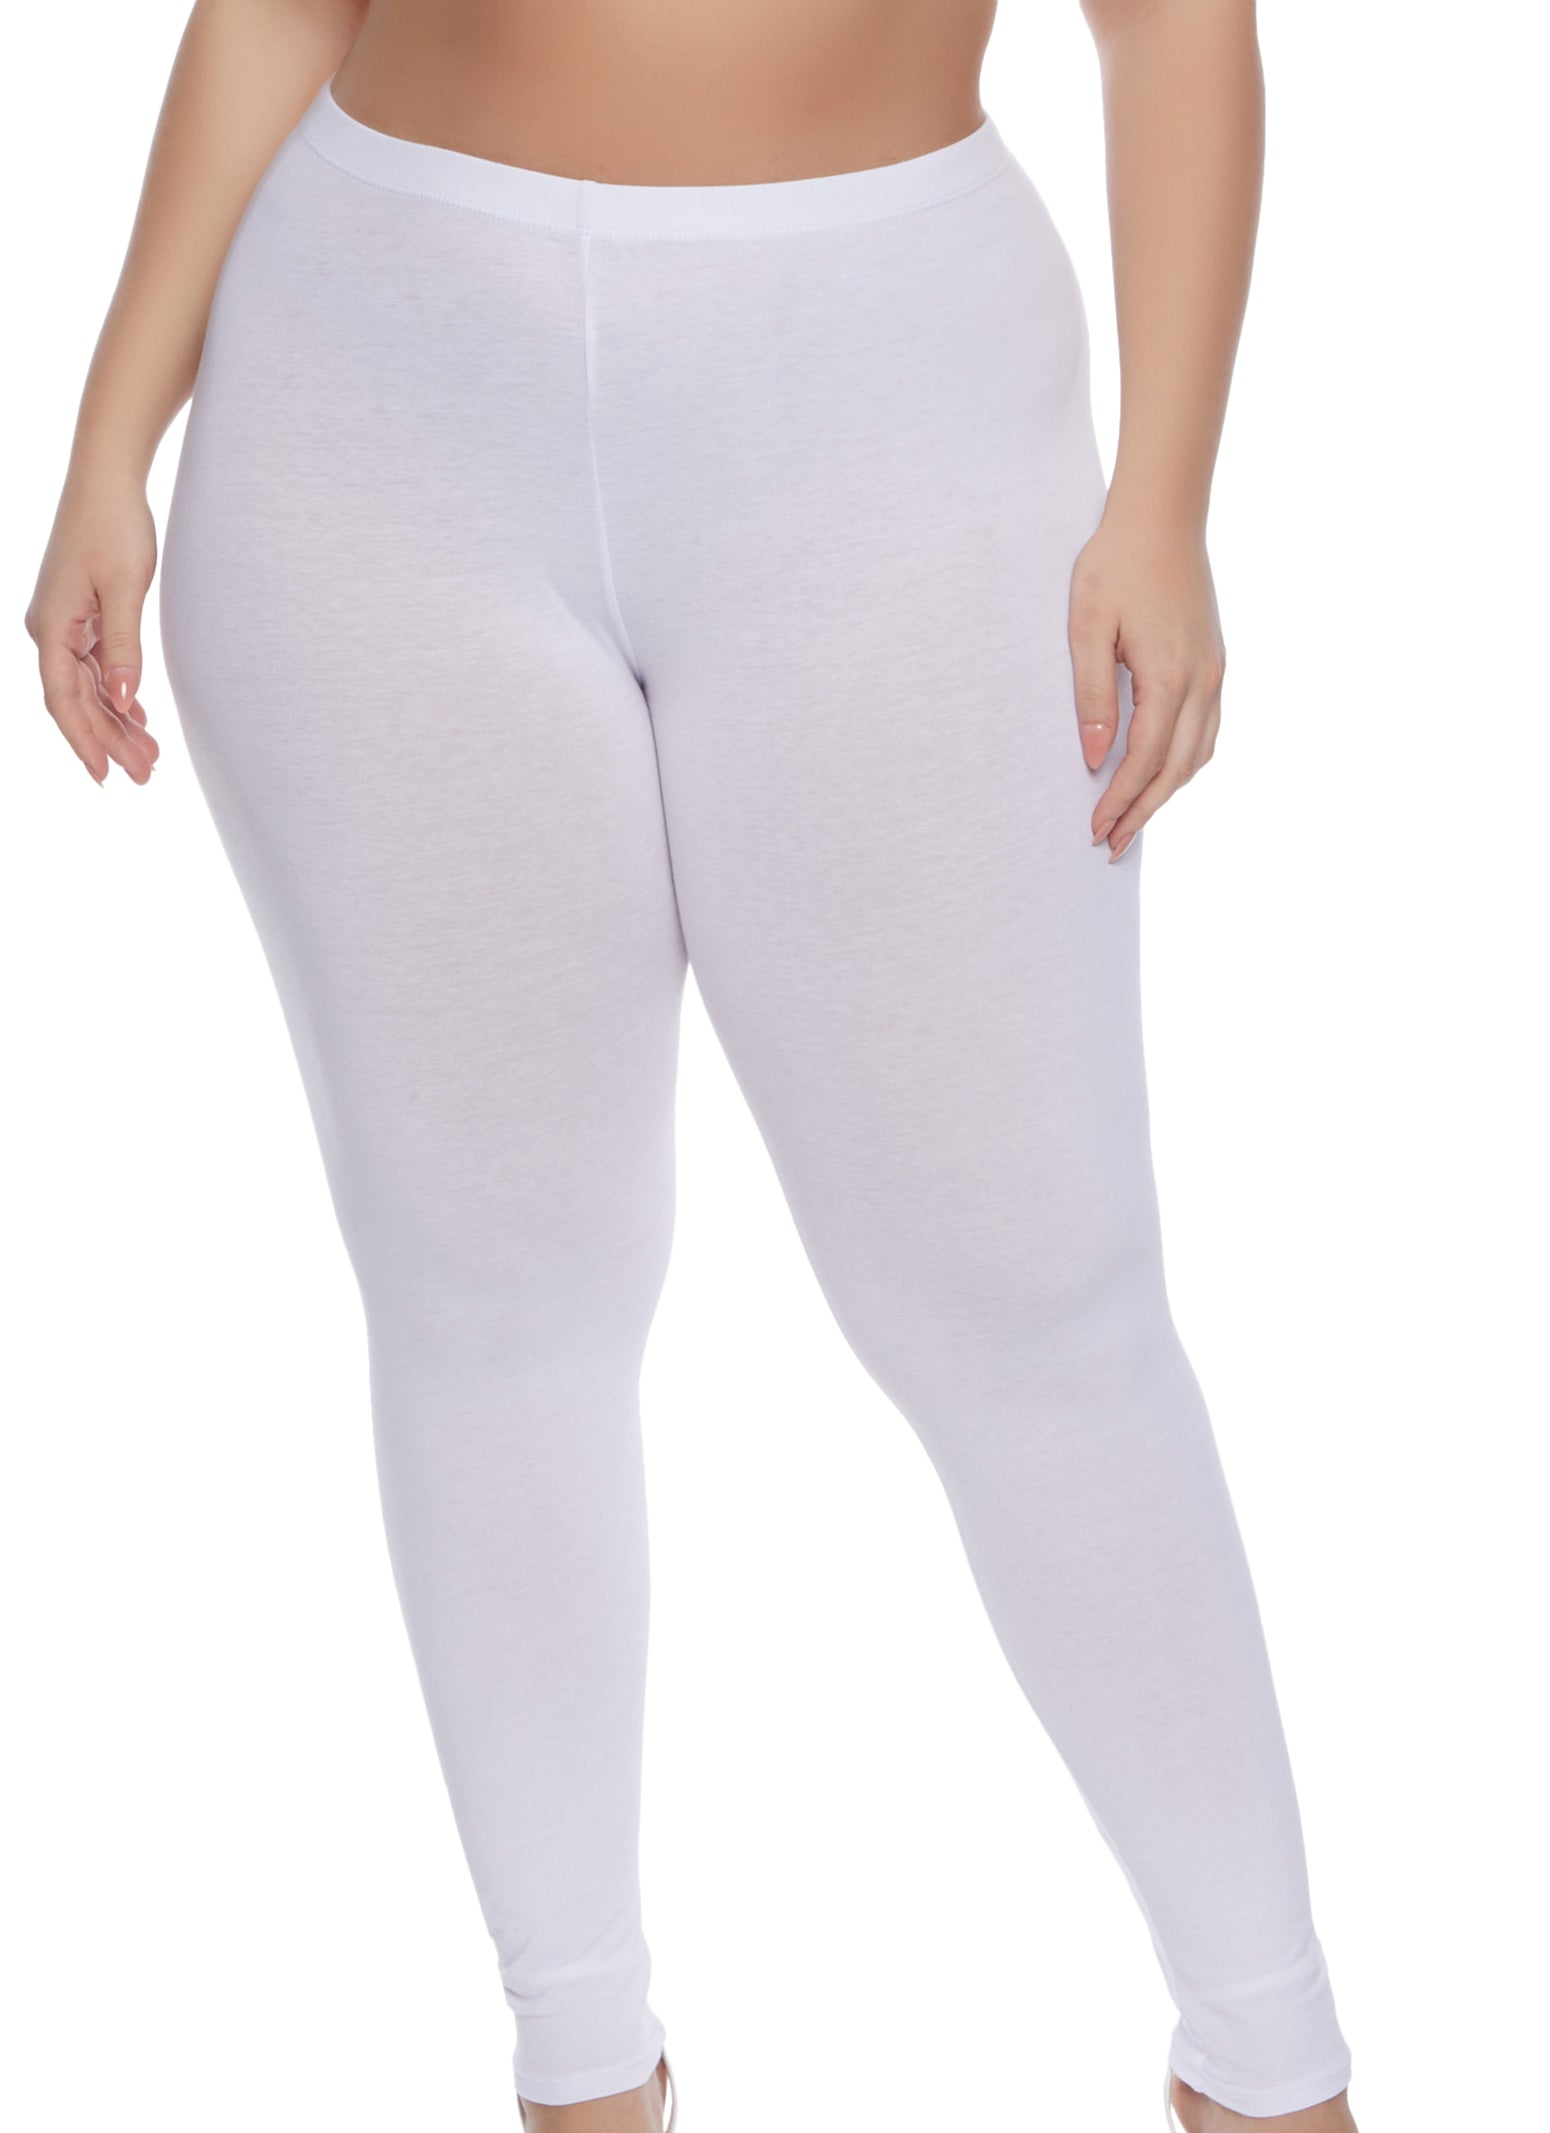 i morgen Pengeudlån hævn Plus Size White Leggings | Everyday Low Prices | Rainbow